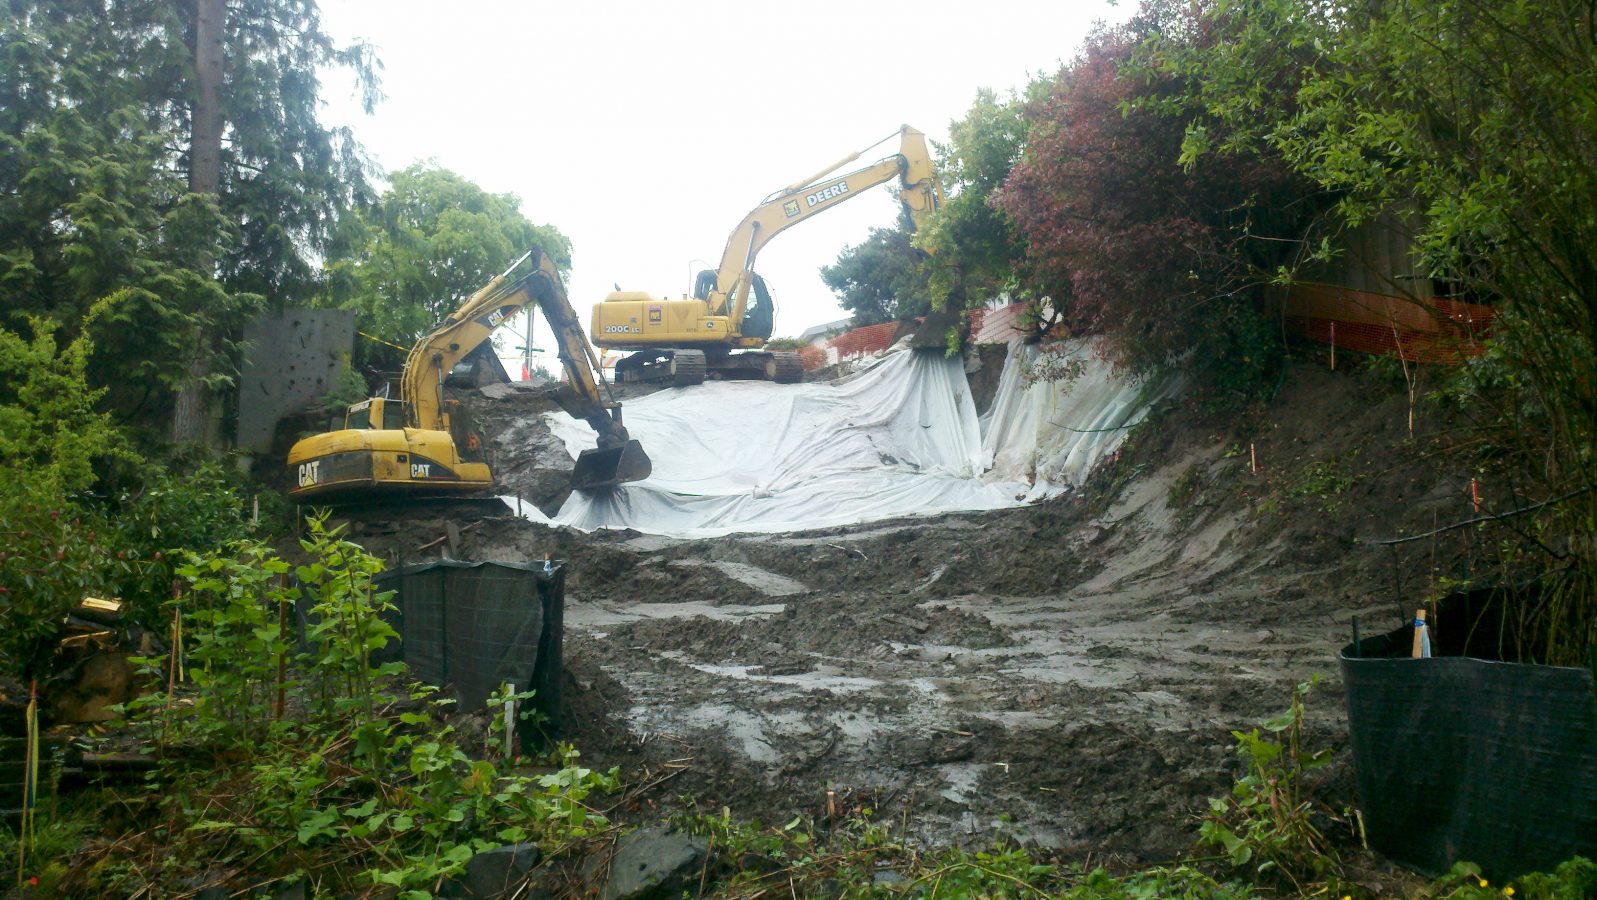 Excavating services in Vancouver, WA and Portland, OR